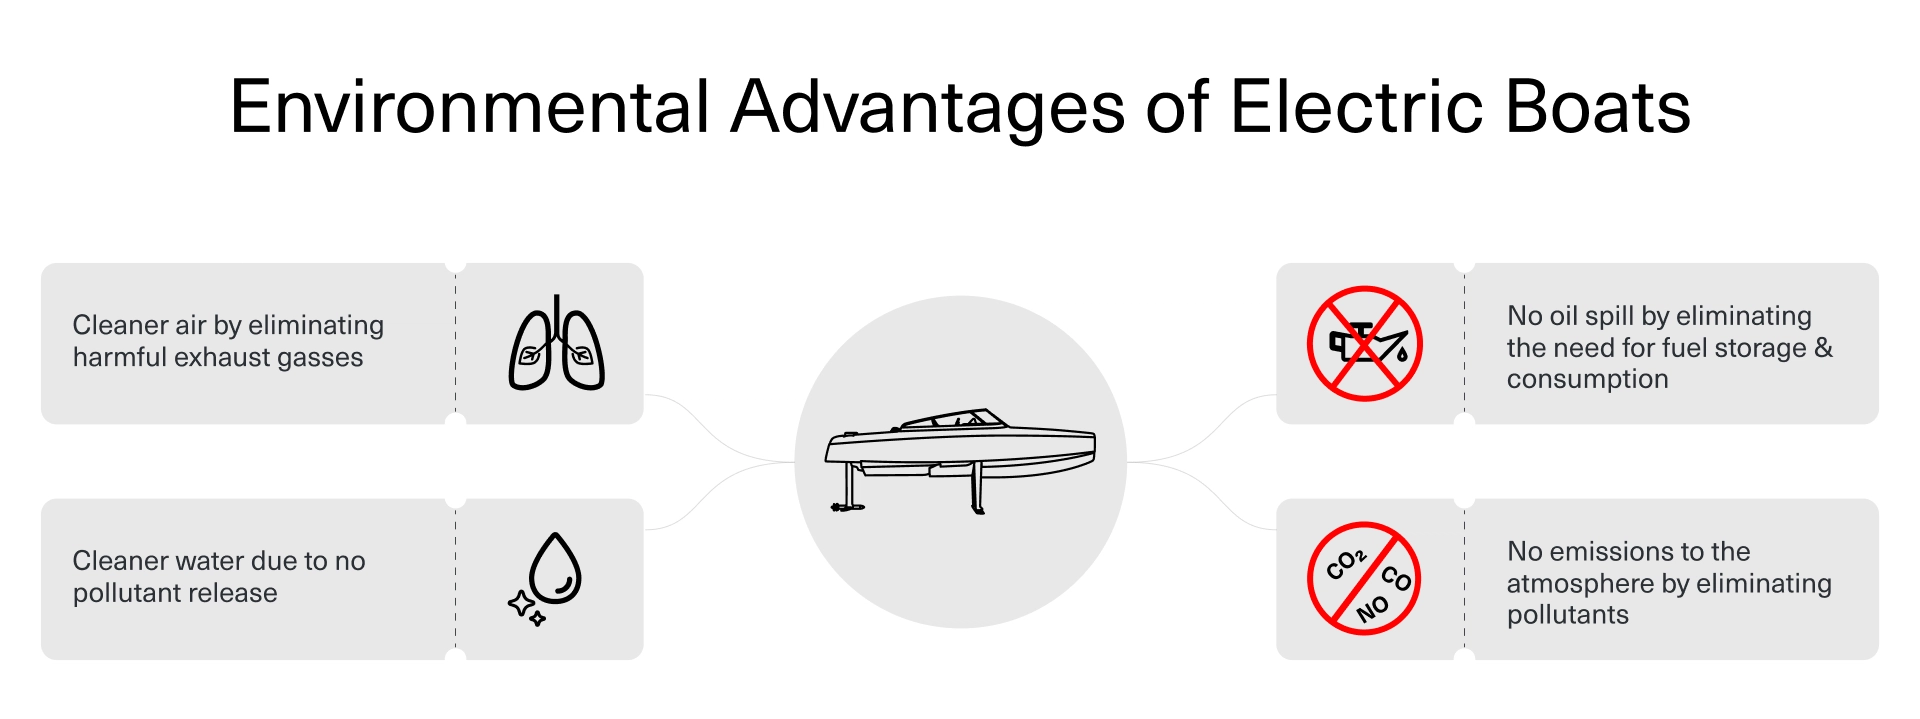 Environmental Advantages of Electric Boats 2